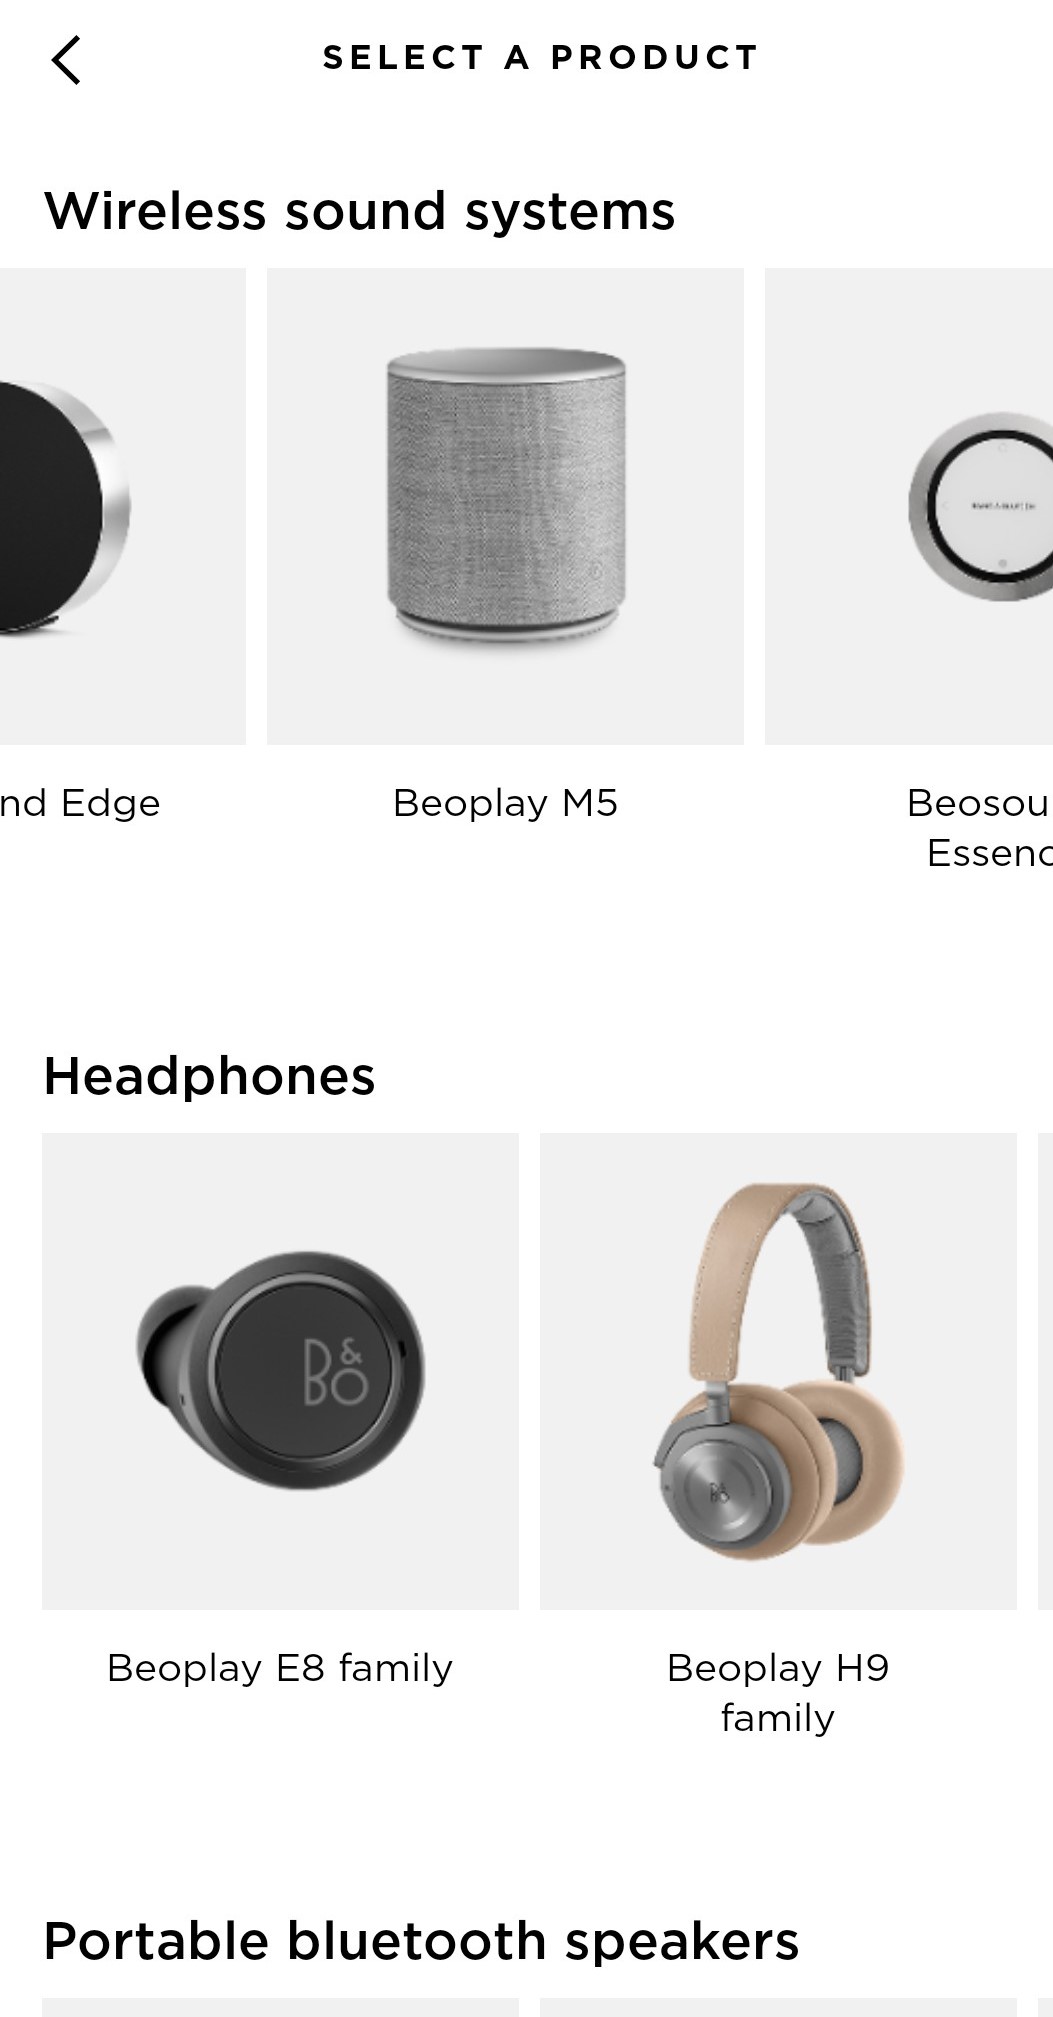 Staple R fond Beoplay M5 first-time setup – Bang & Olufsen Support